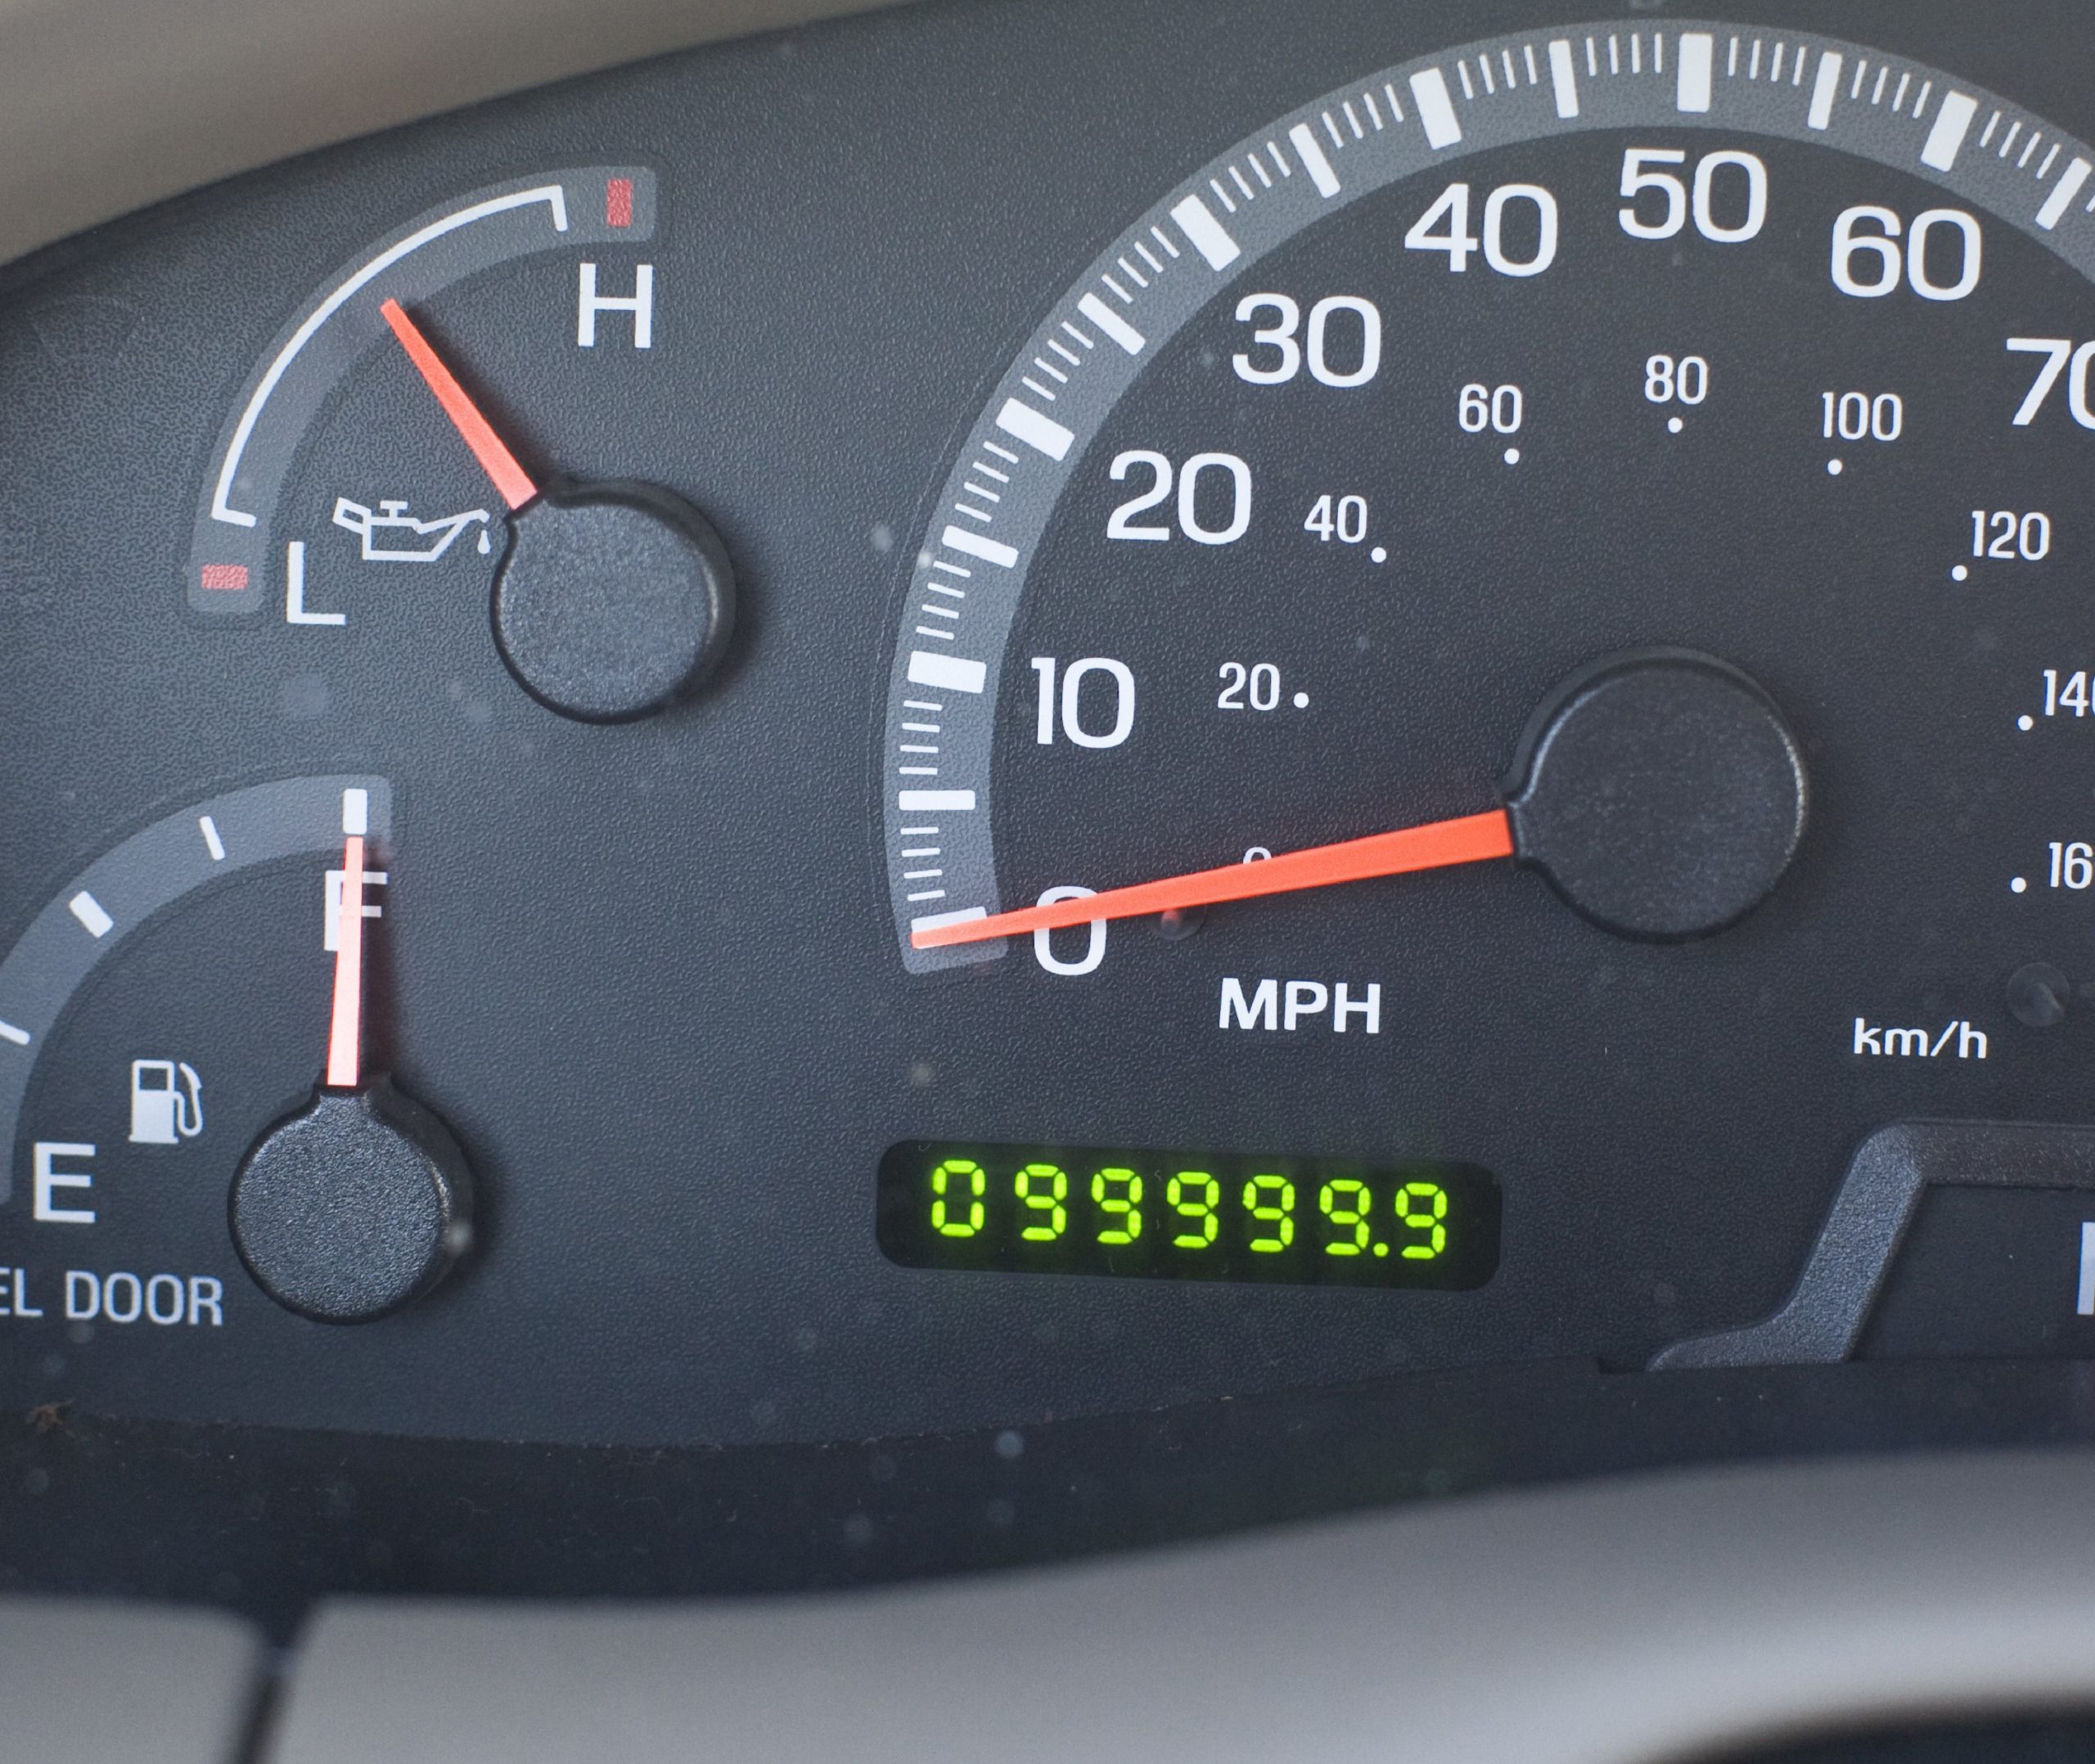 A car's odometer, on the cusp of going over 100,000 miles